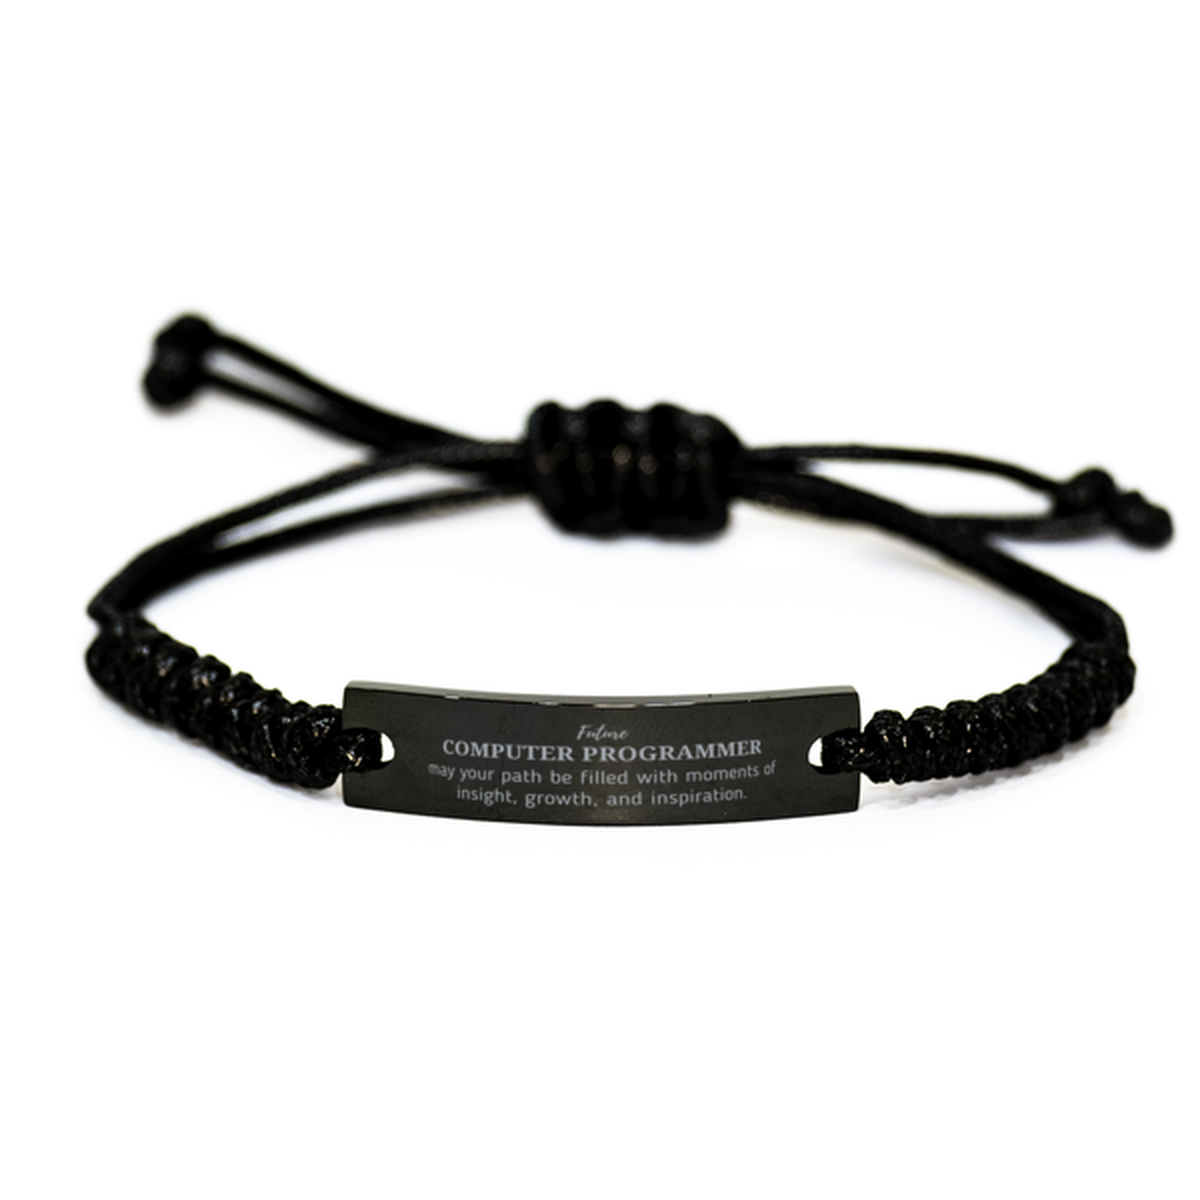 Future Computer Programmer Gifts, May your path be filled with moments of insight, Graduation Gifts for New Computer Programmer, Christmas Unique Black Rope Bracelet For Men, Women, Friends